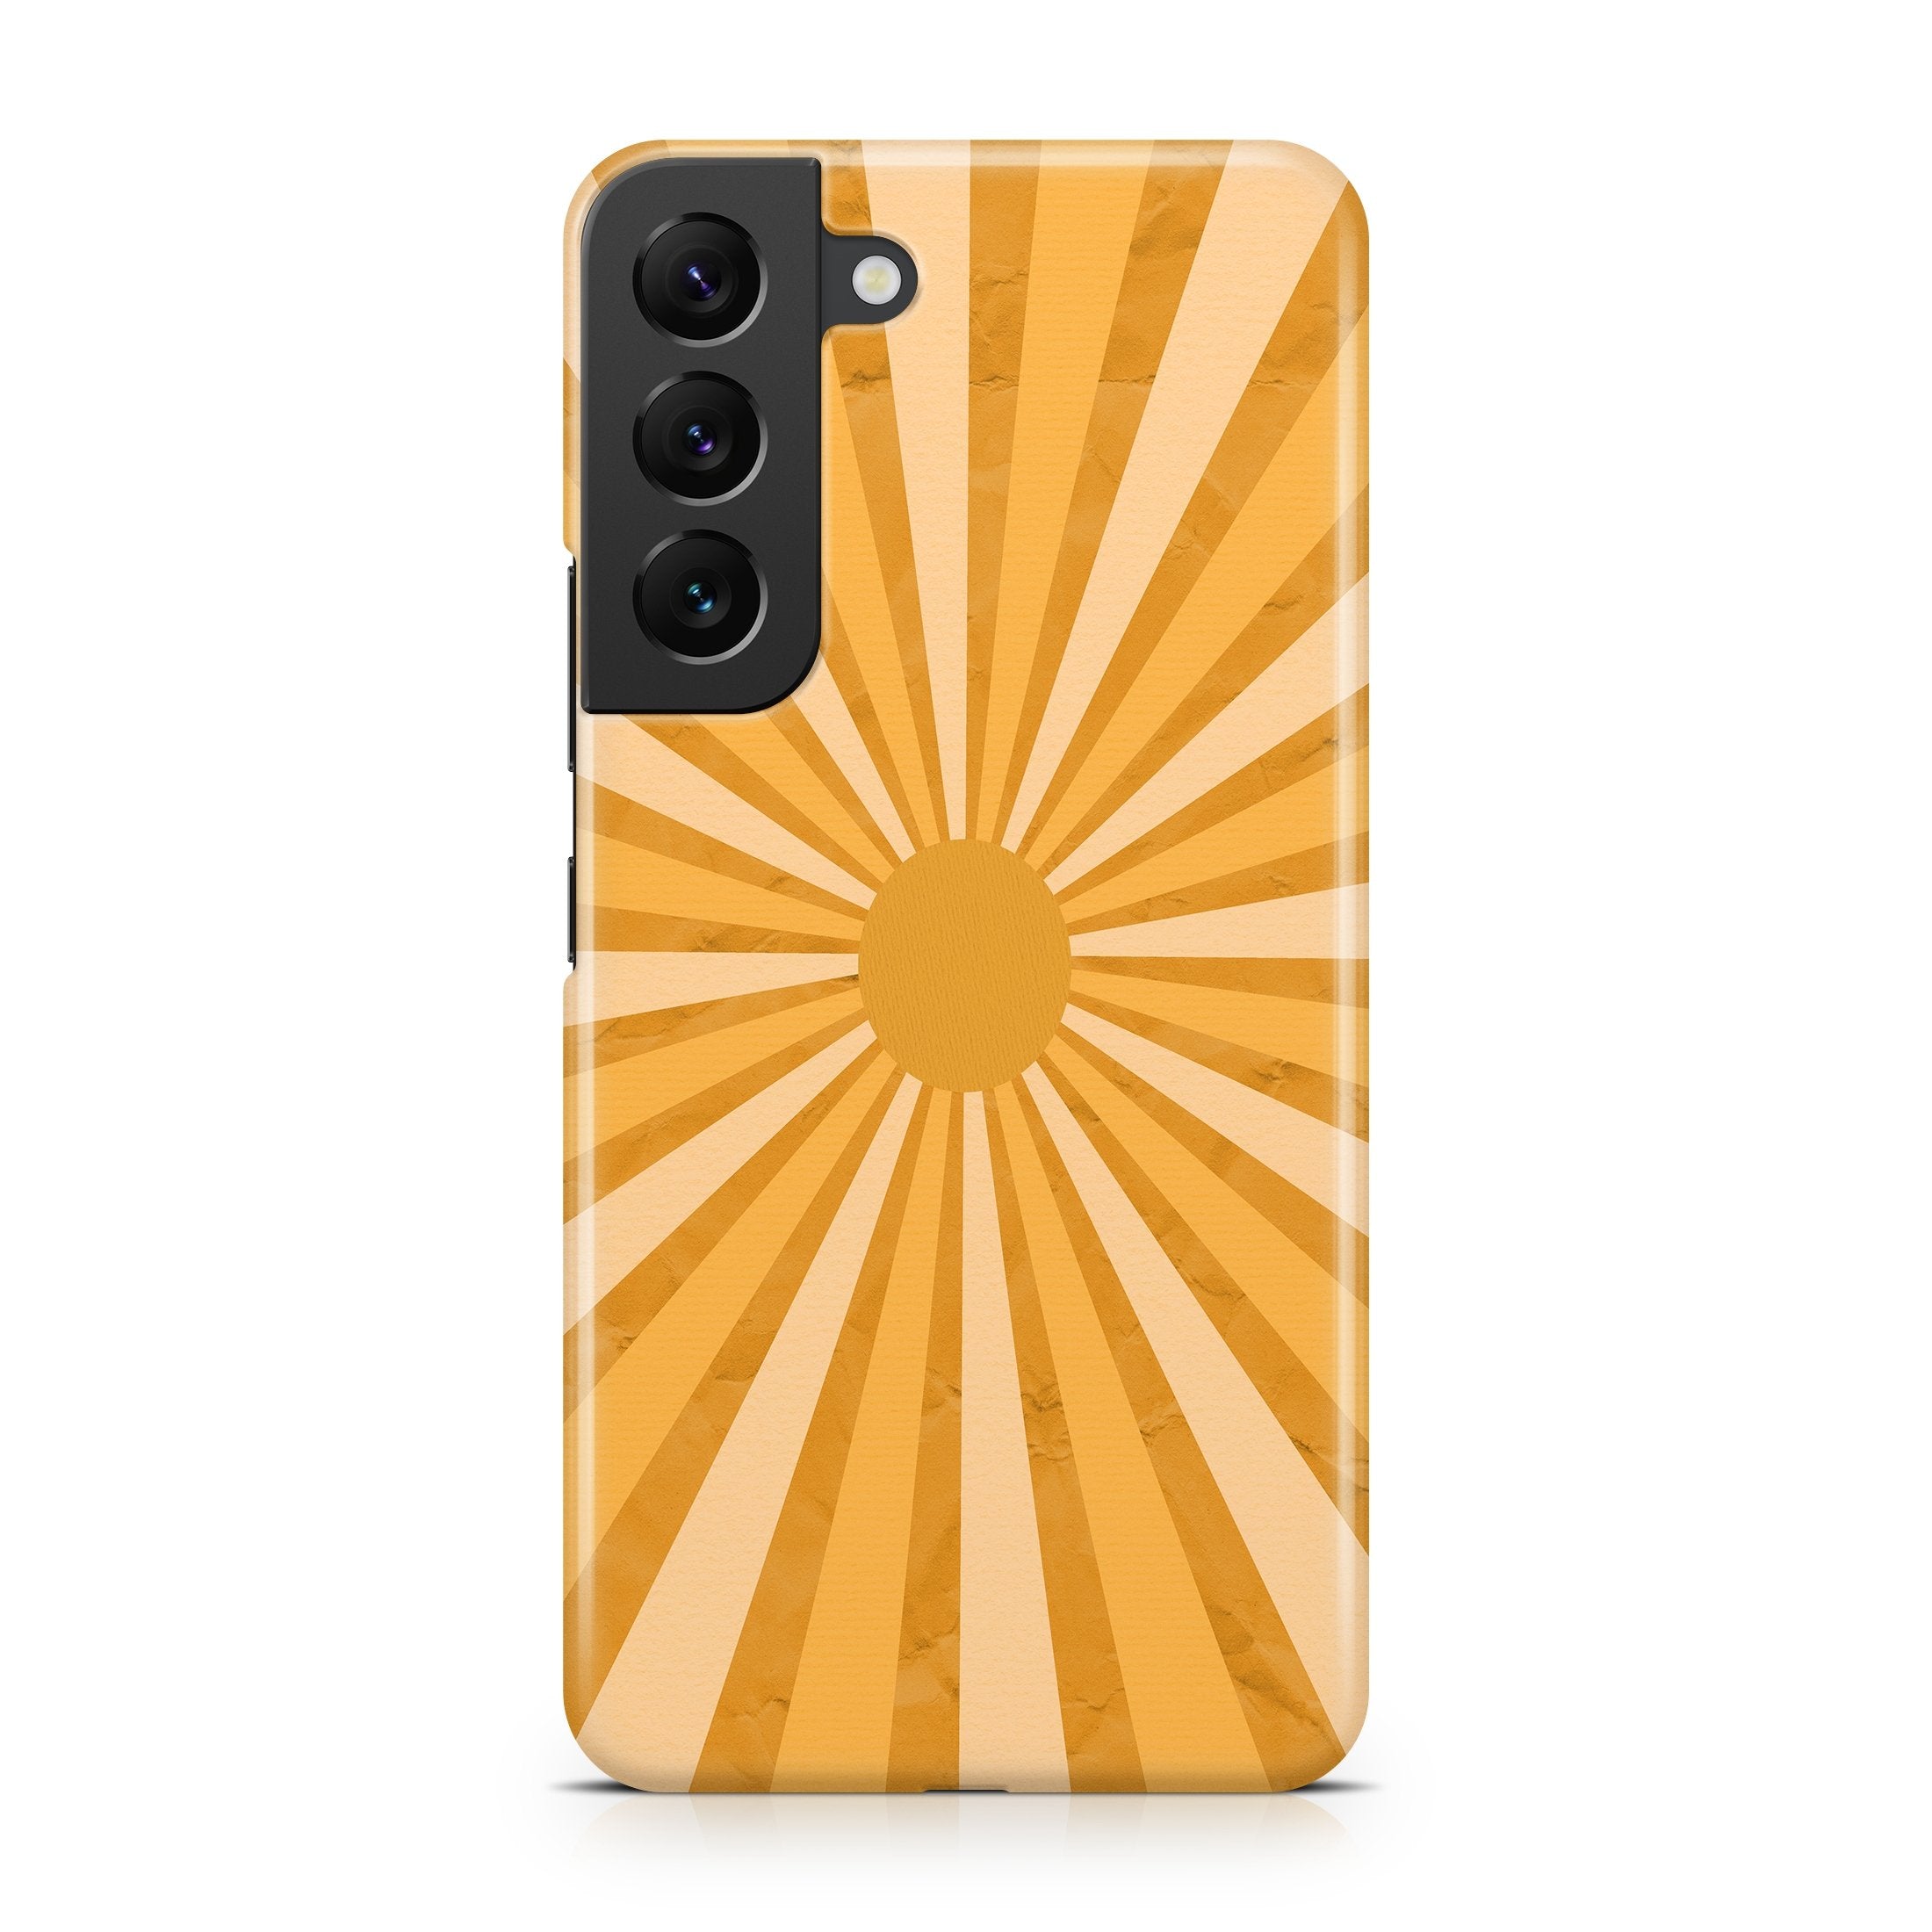 Retro Sunlight - Samsung phone case designs by CaseSwagger